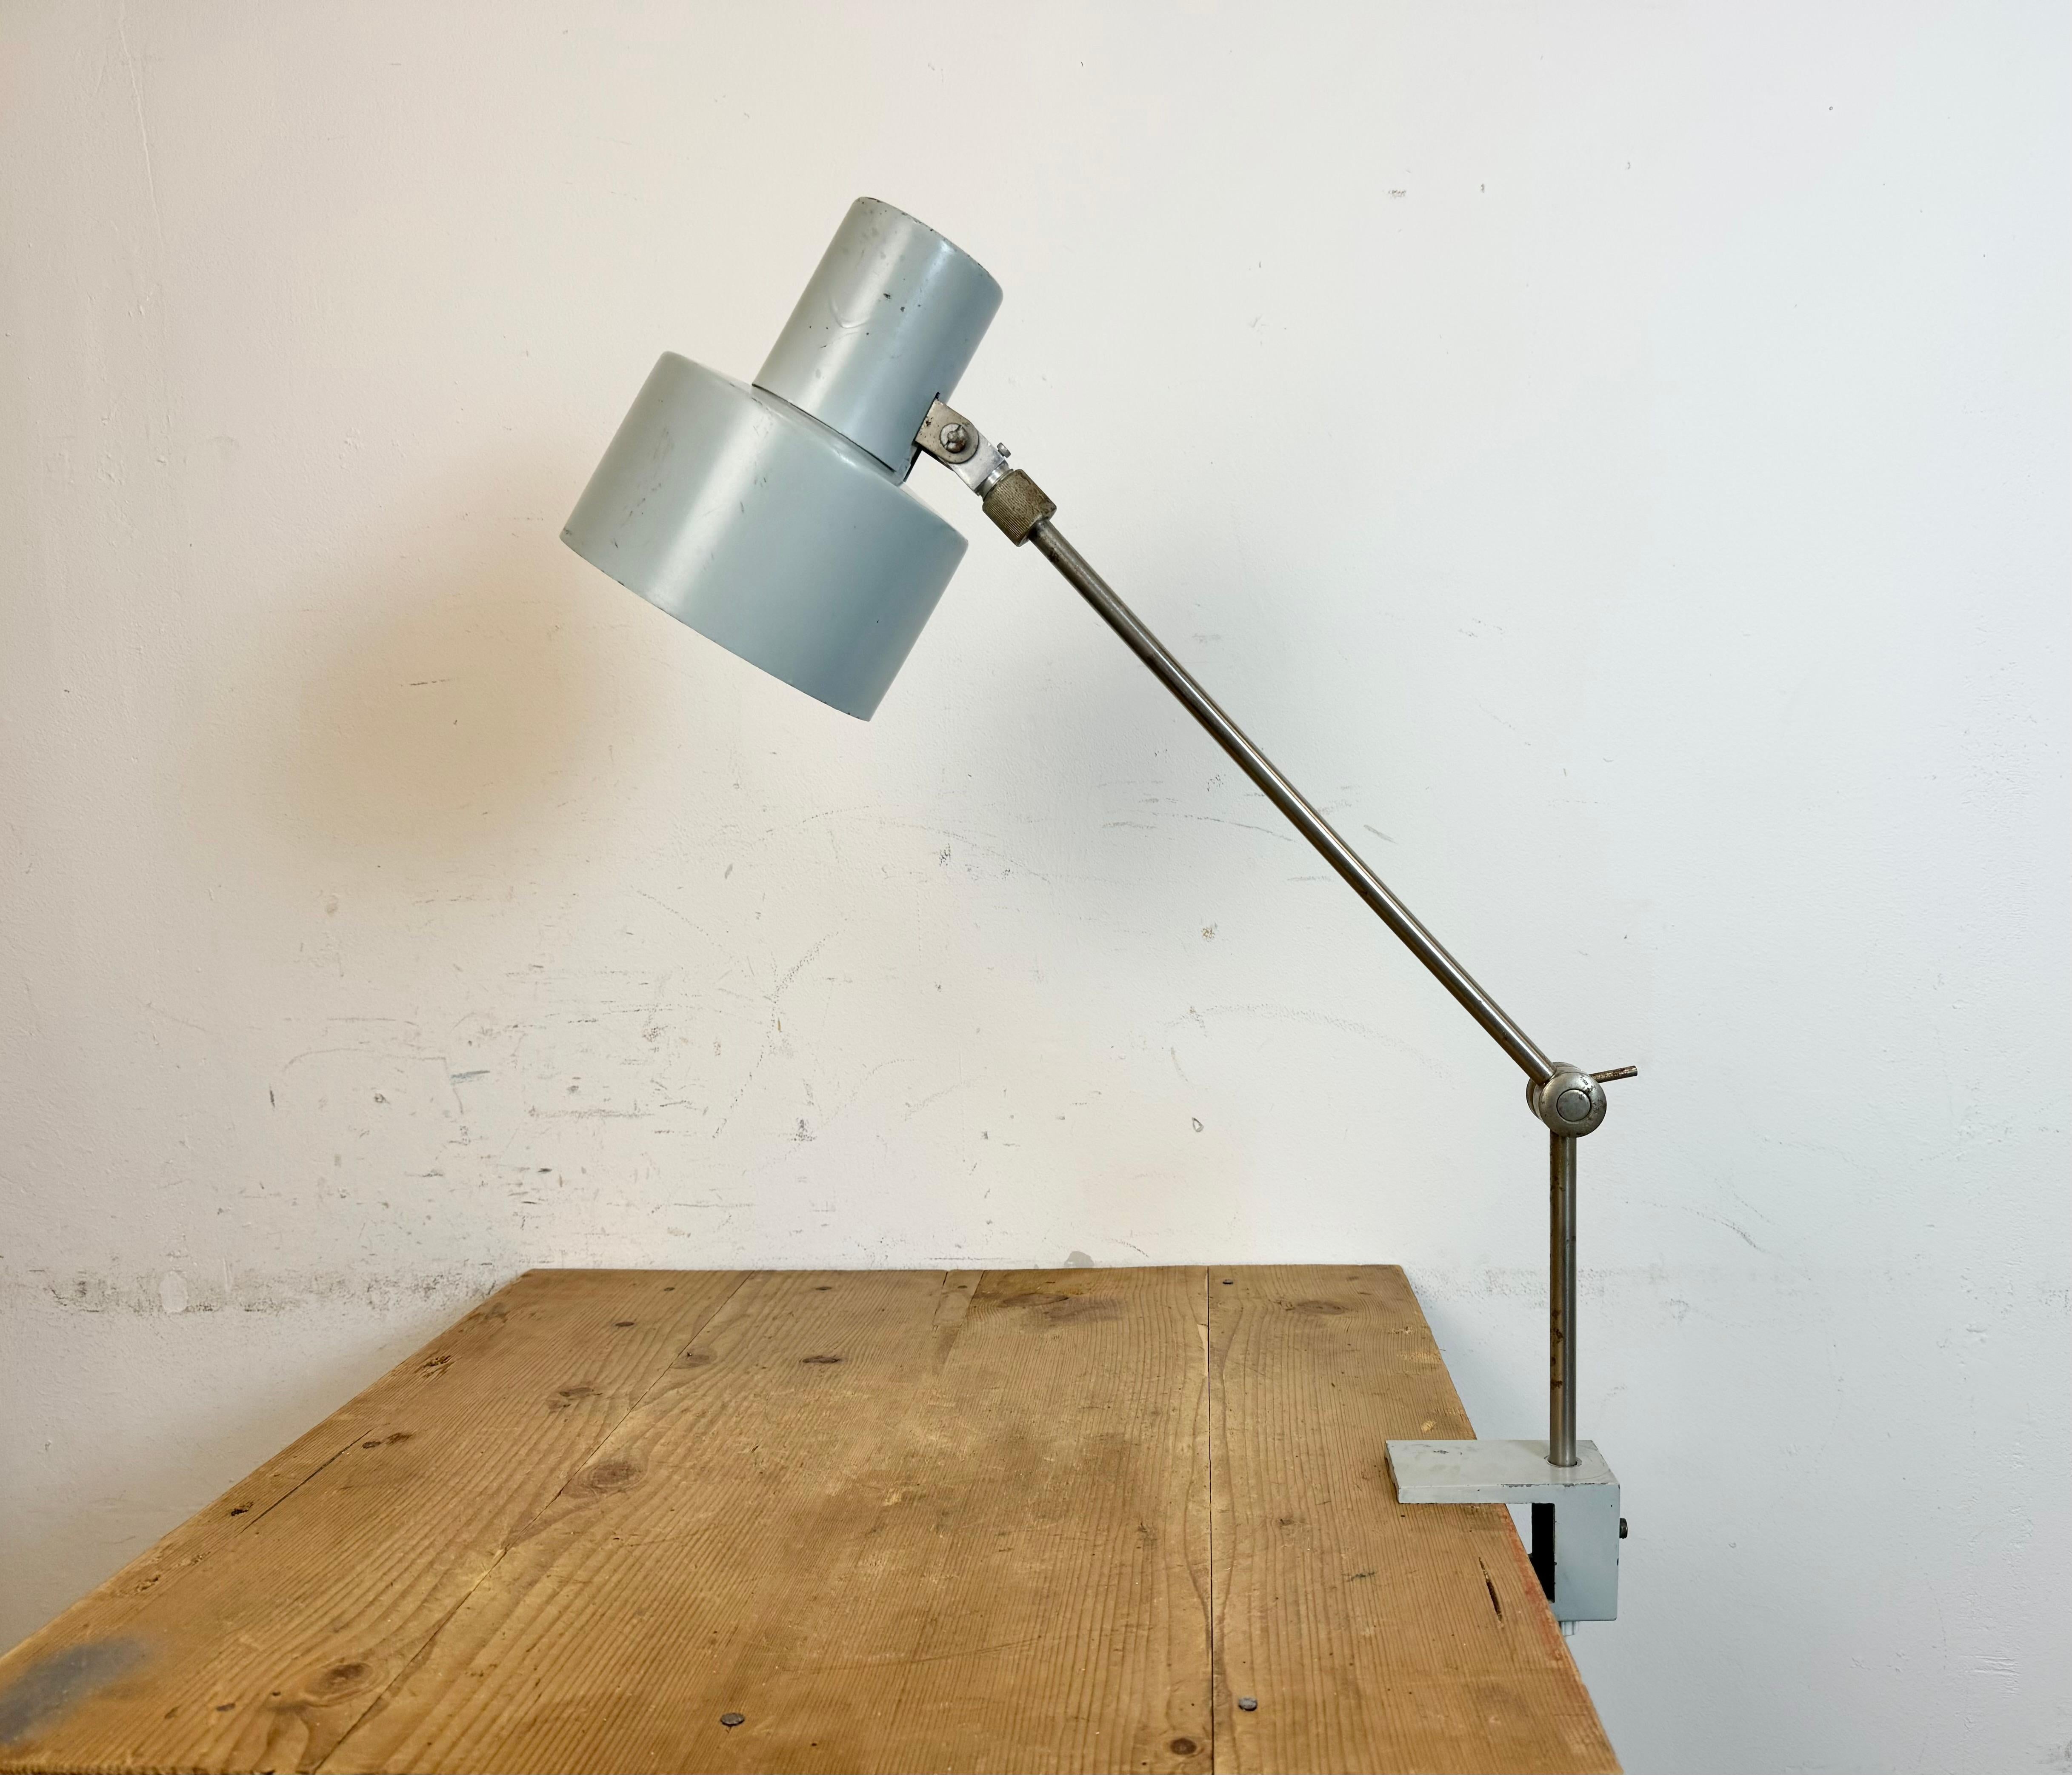 Vintage grey factory office table lamp made by Elektrosvit in former Czechoslovakia during the 1970s. It features a grey metal shade and clamp base and chrome plated arm with two adjustable joints.The original socket requires standard  E27/ E26